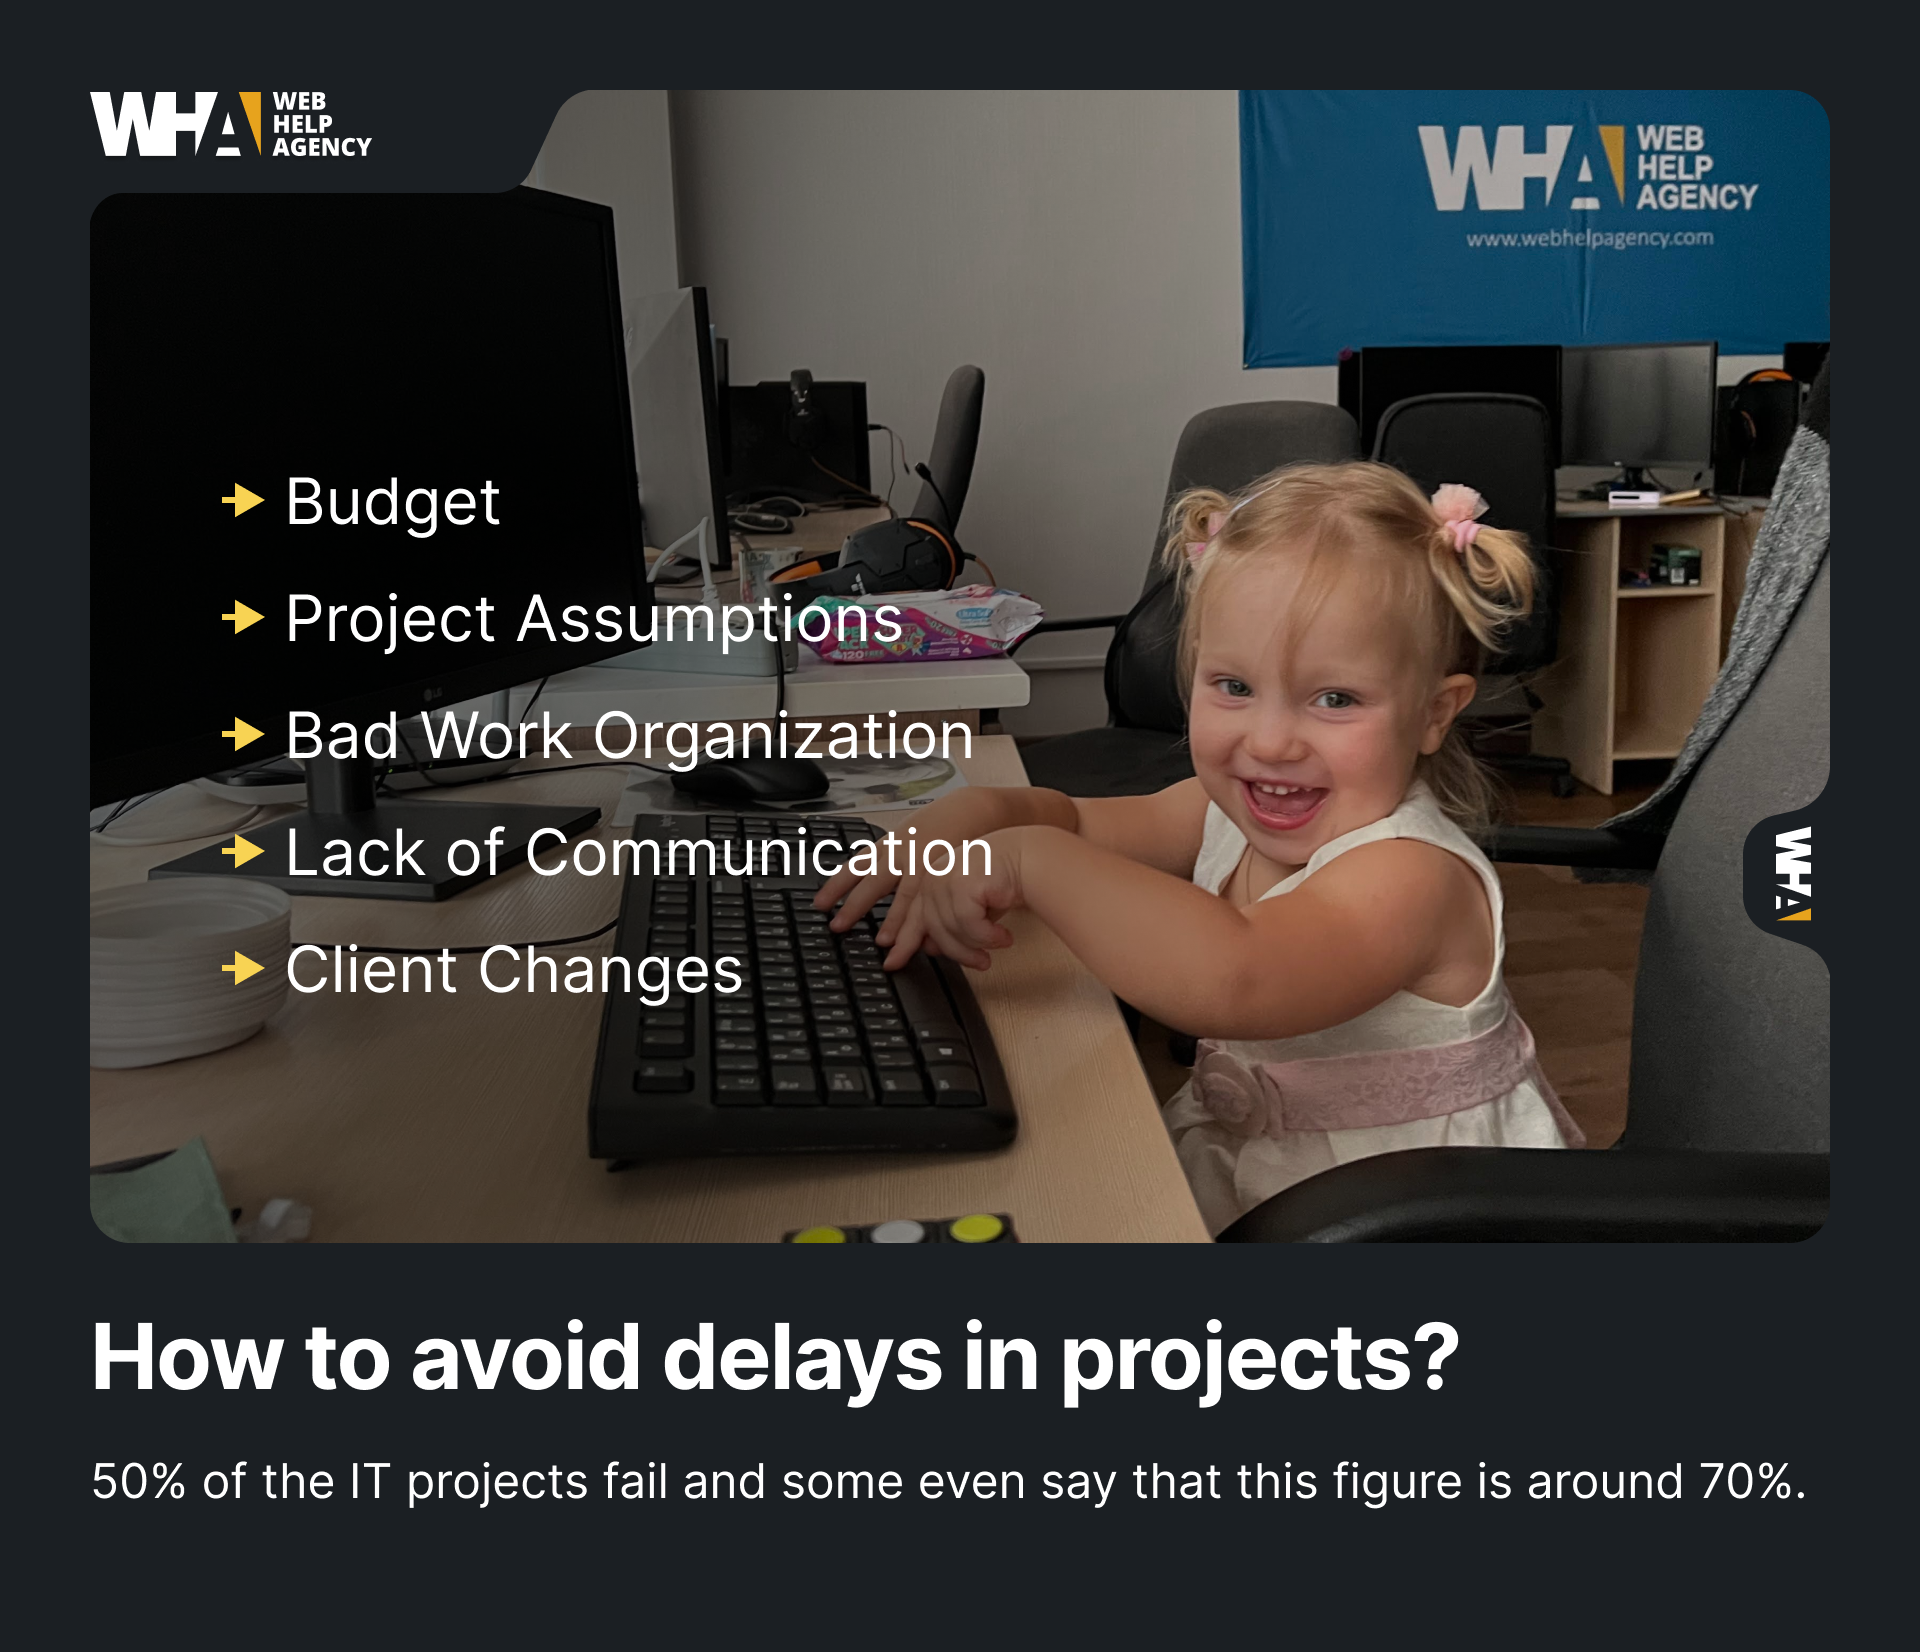 How to avoid delays, project management